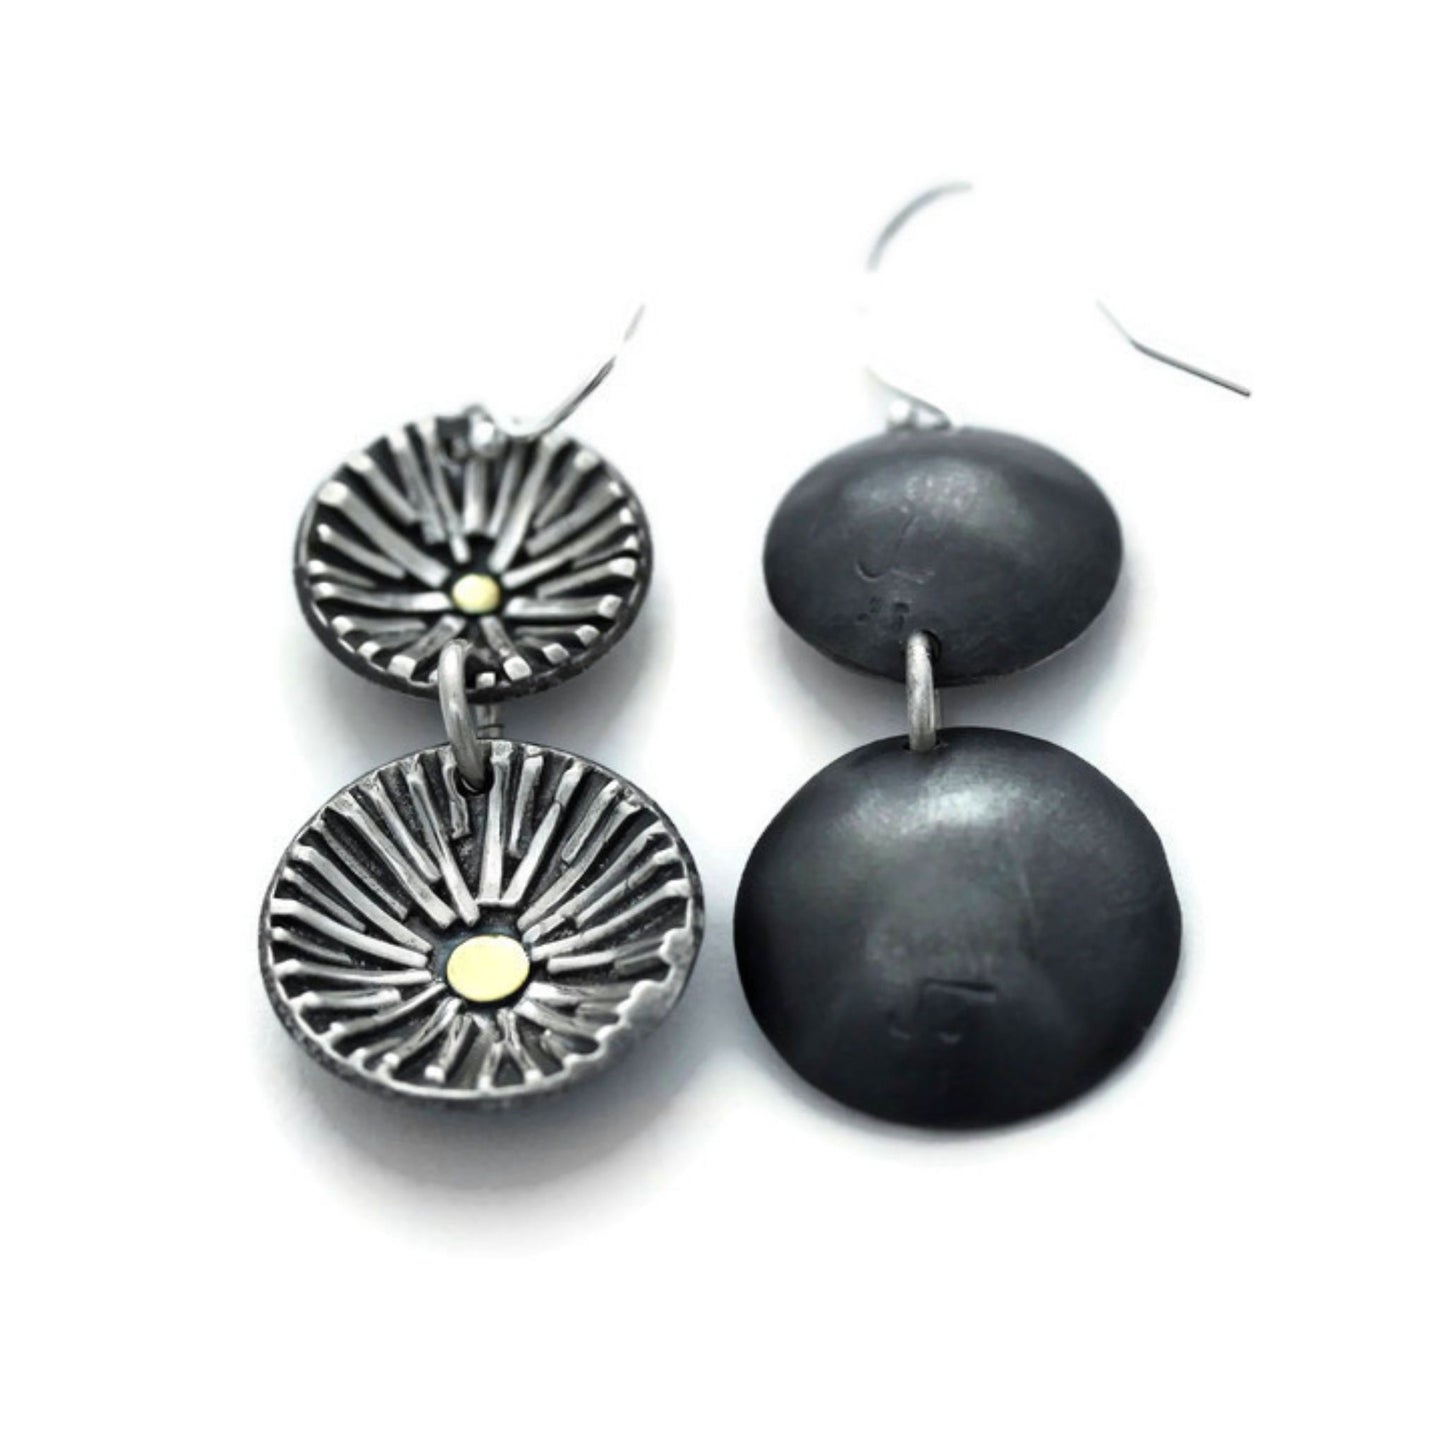 Silver double sun earrings front and back by Jen Lesea Designs